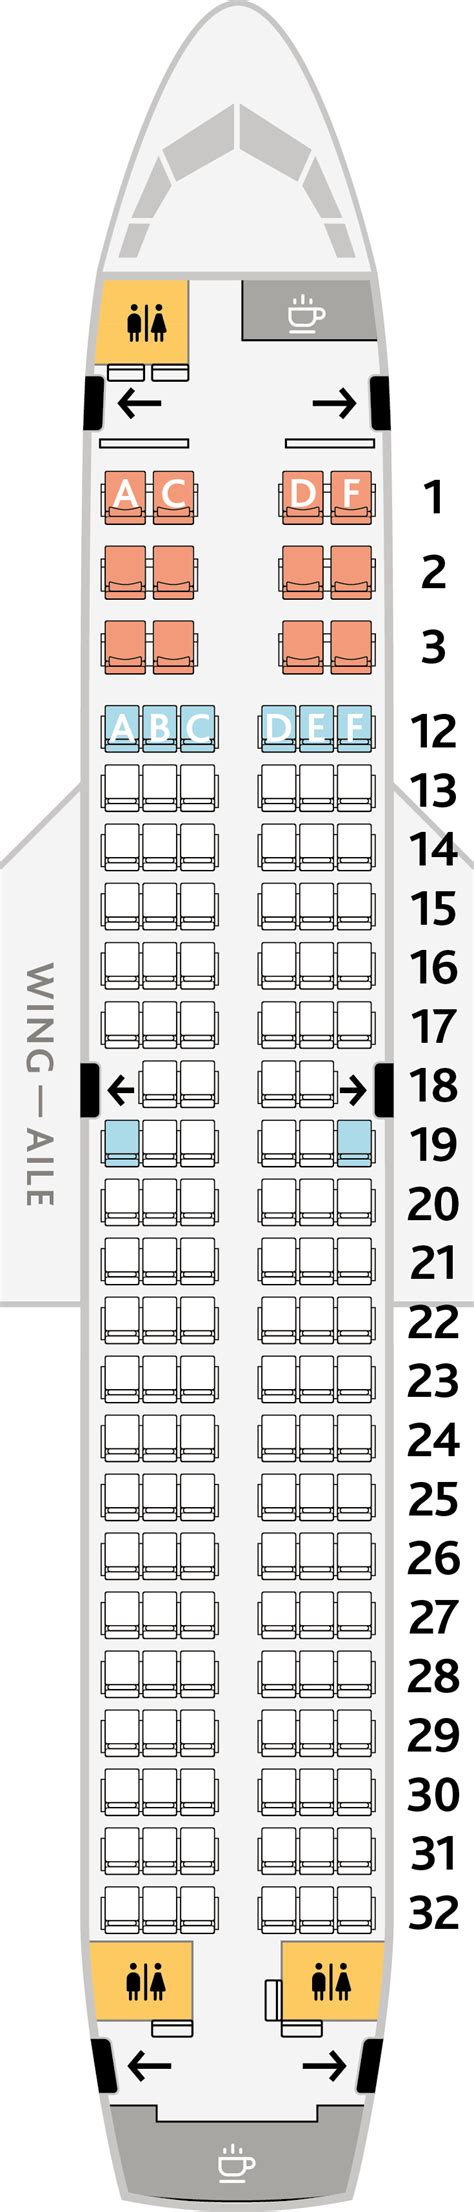 seat selection air canada